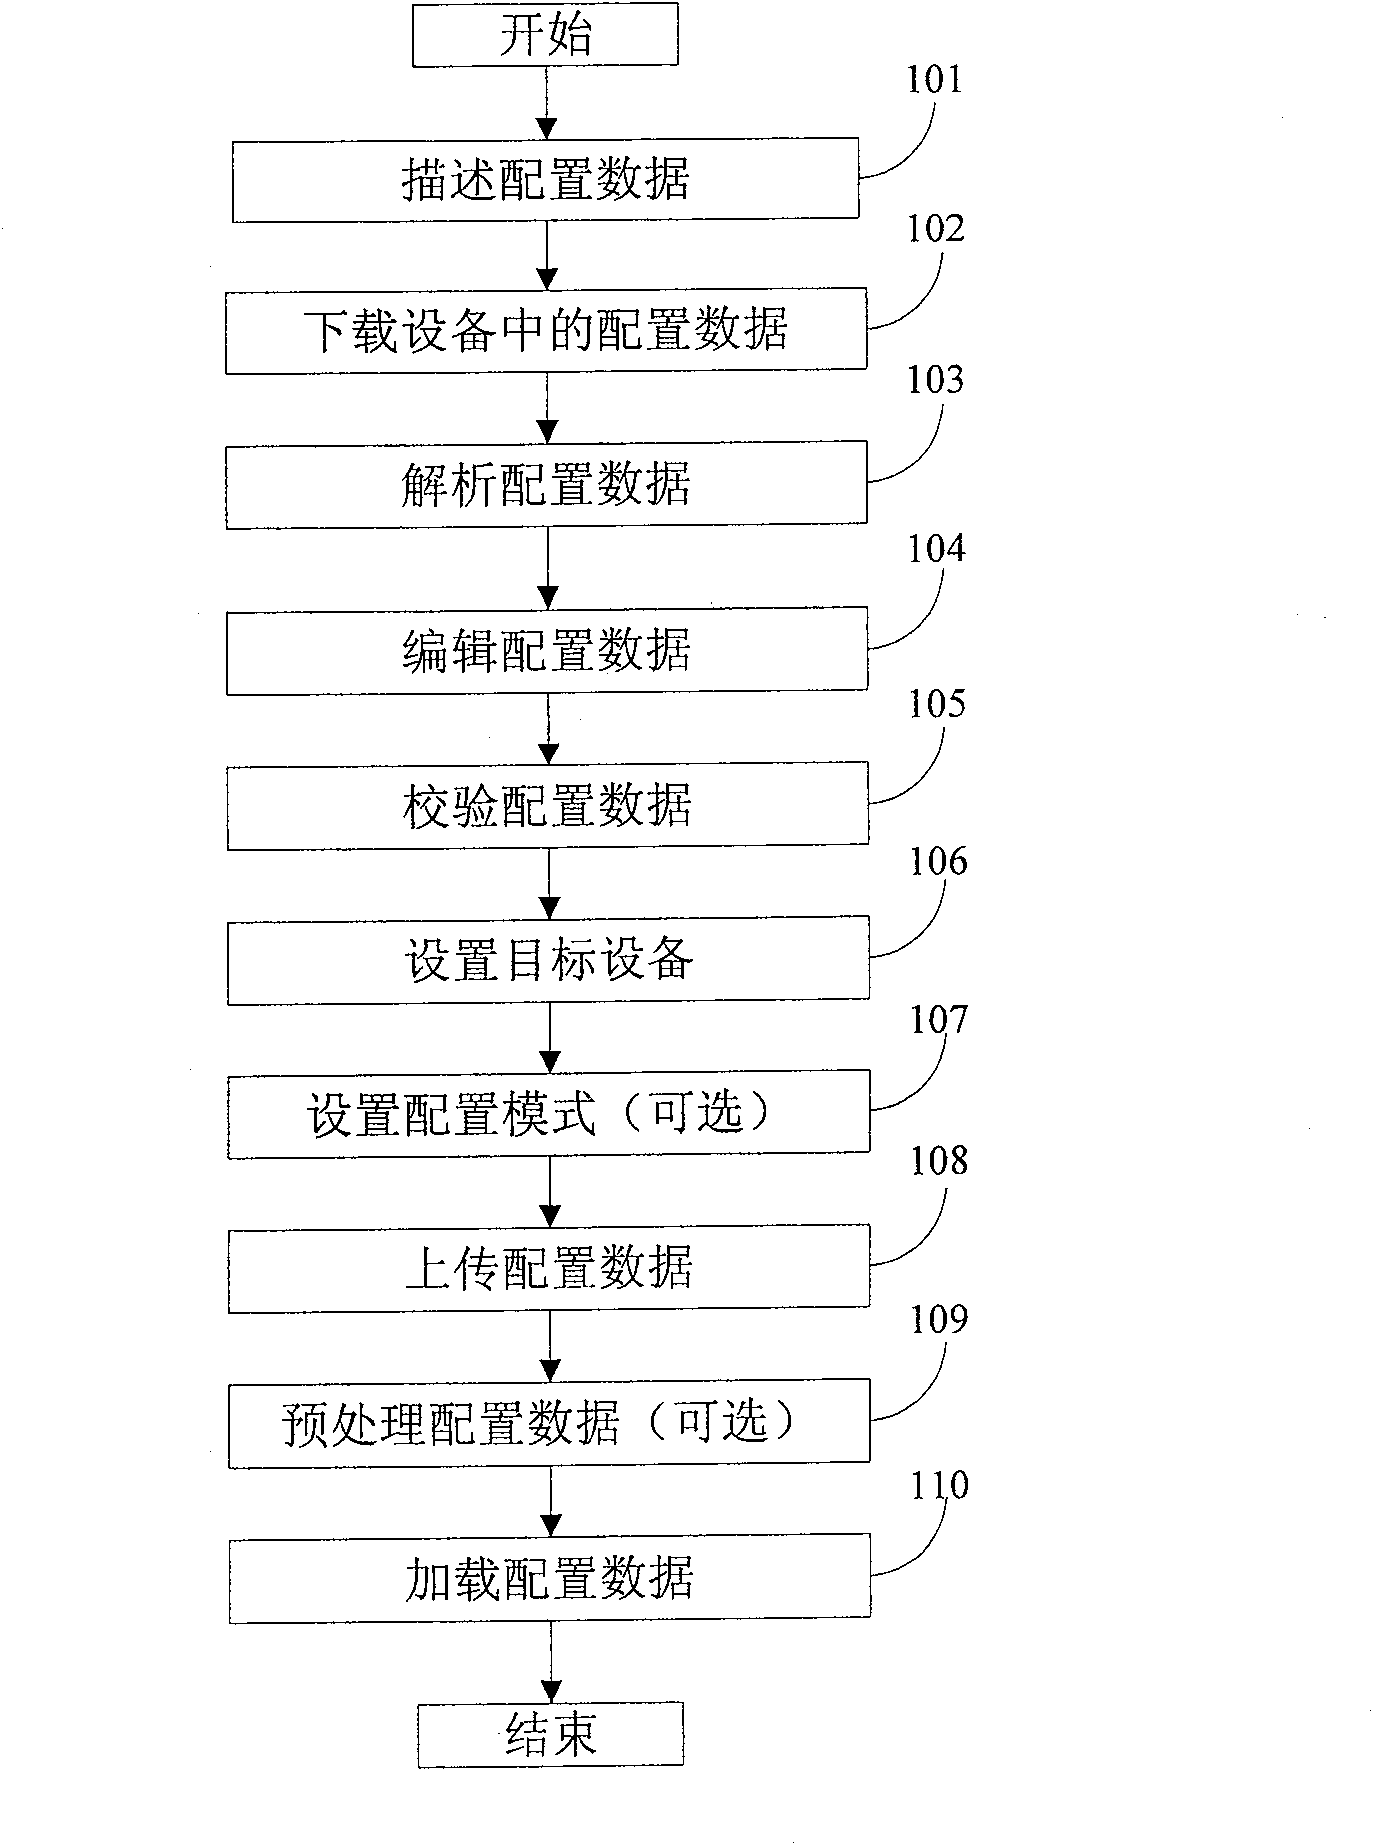 Communication apparatus batch configuration managerial approach and apparatus